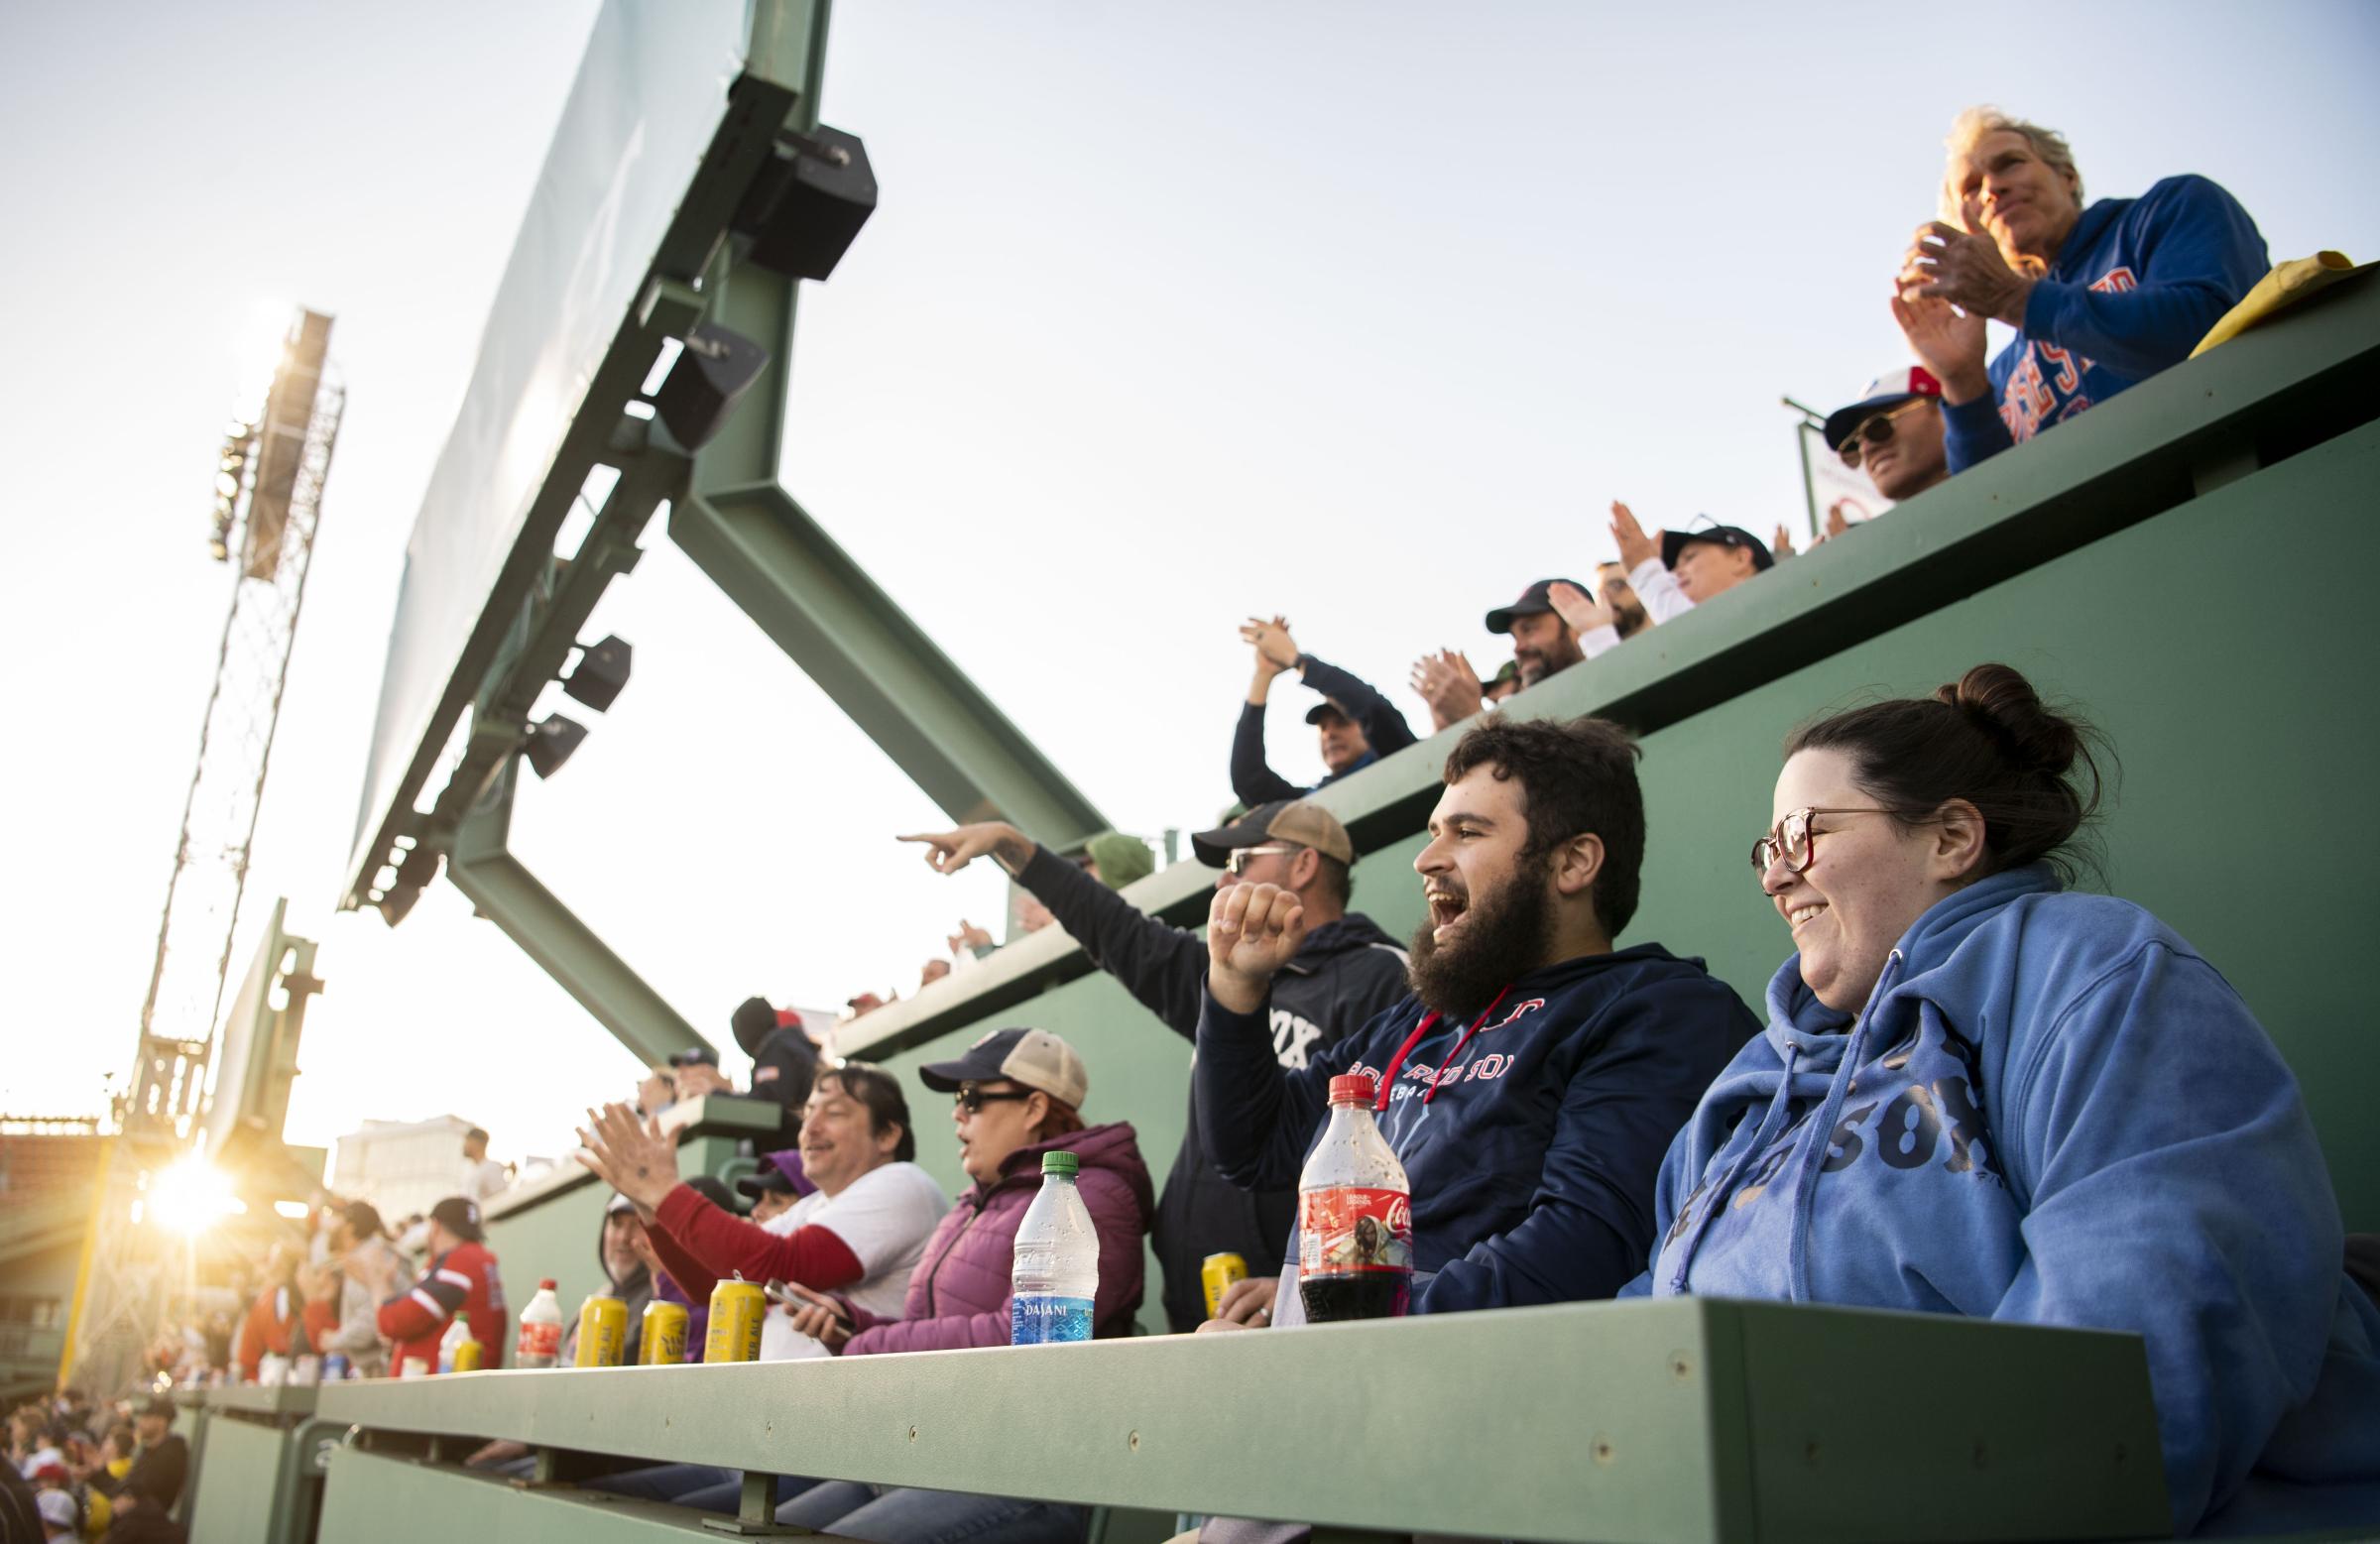 The 2023 Boston Red Sox  - April 1, 2023, Boston, MA: Fans cheer on top of the Green...